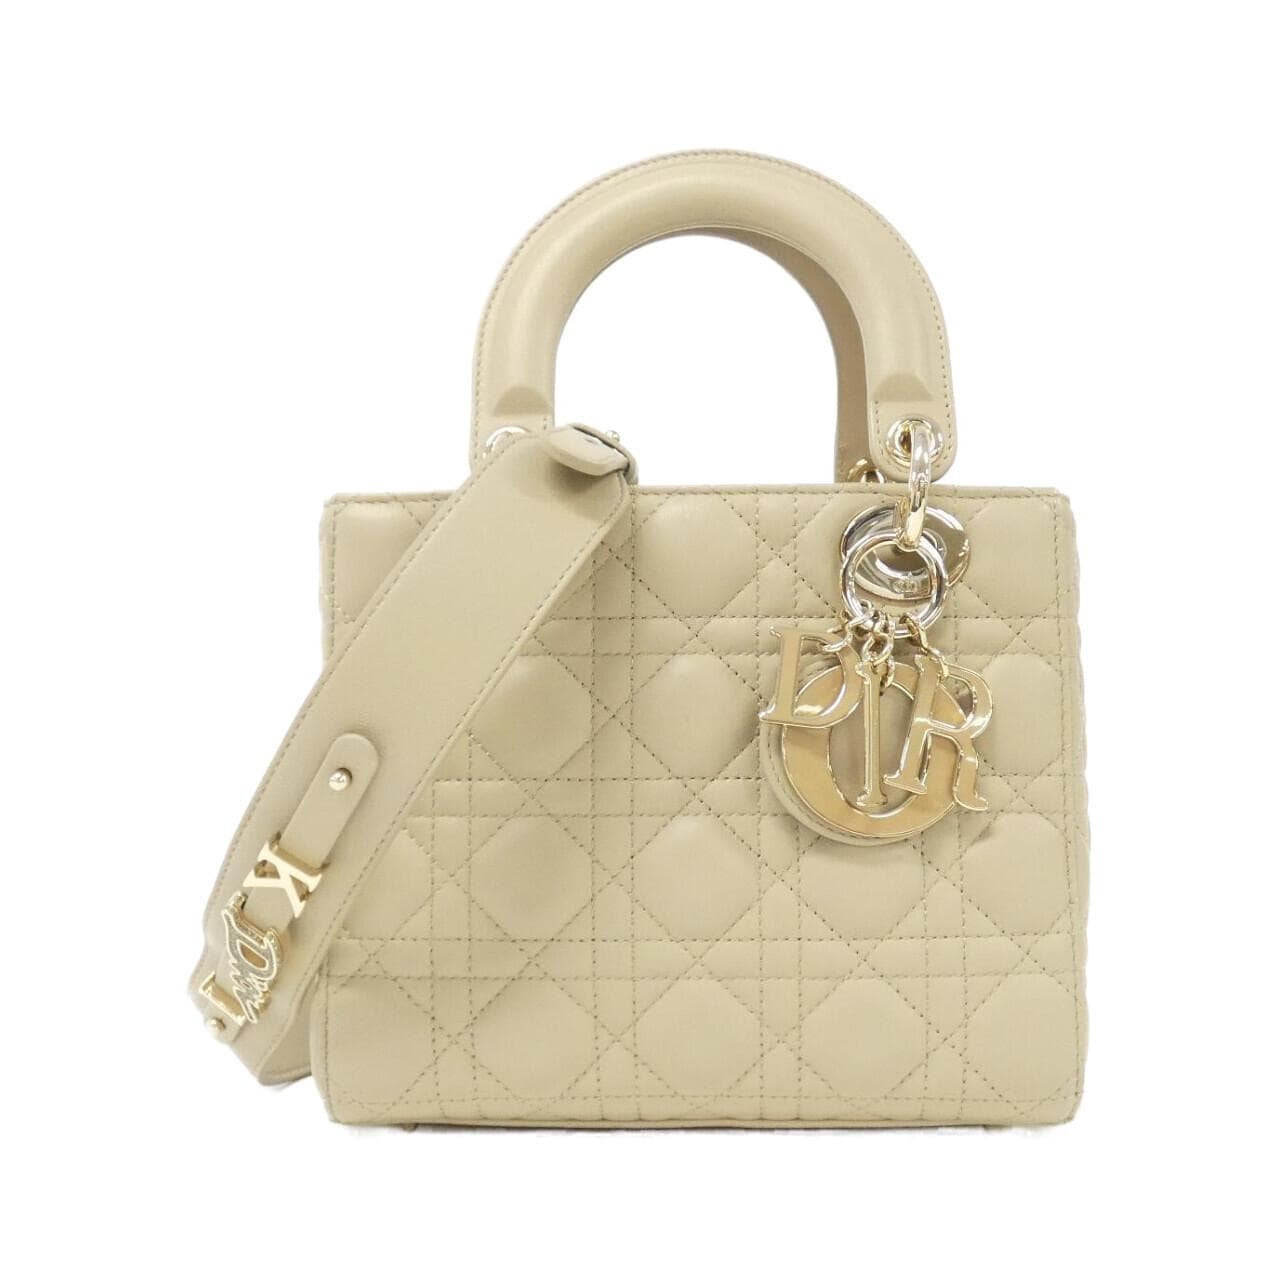 WHICH LADY DIOR SIZE ARE YOU? - Bags